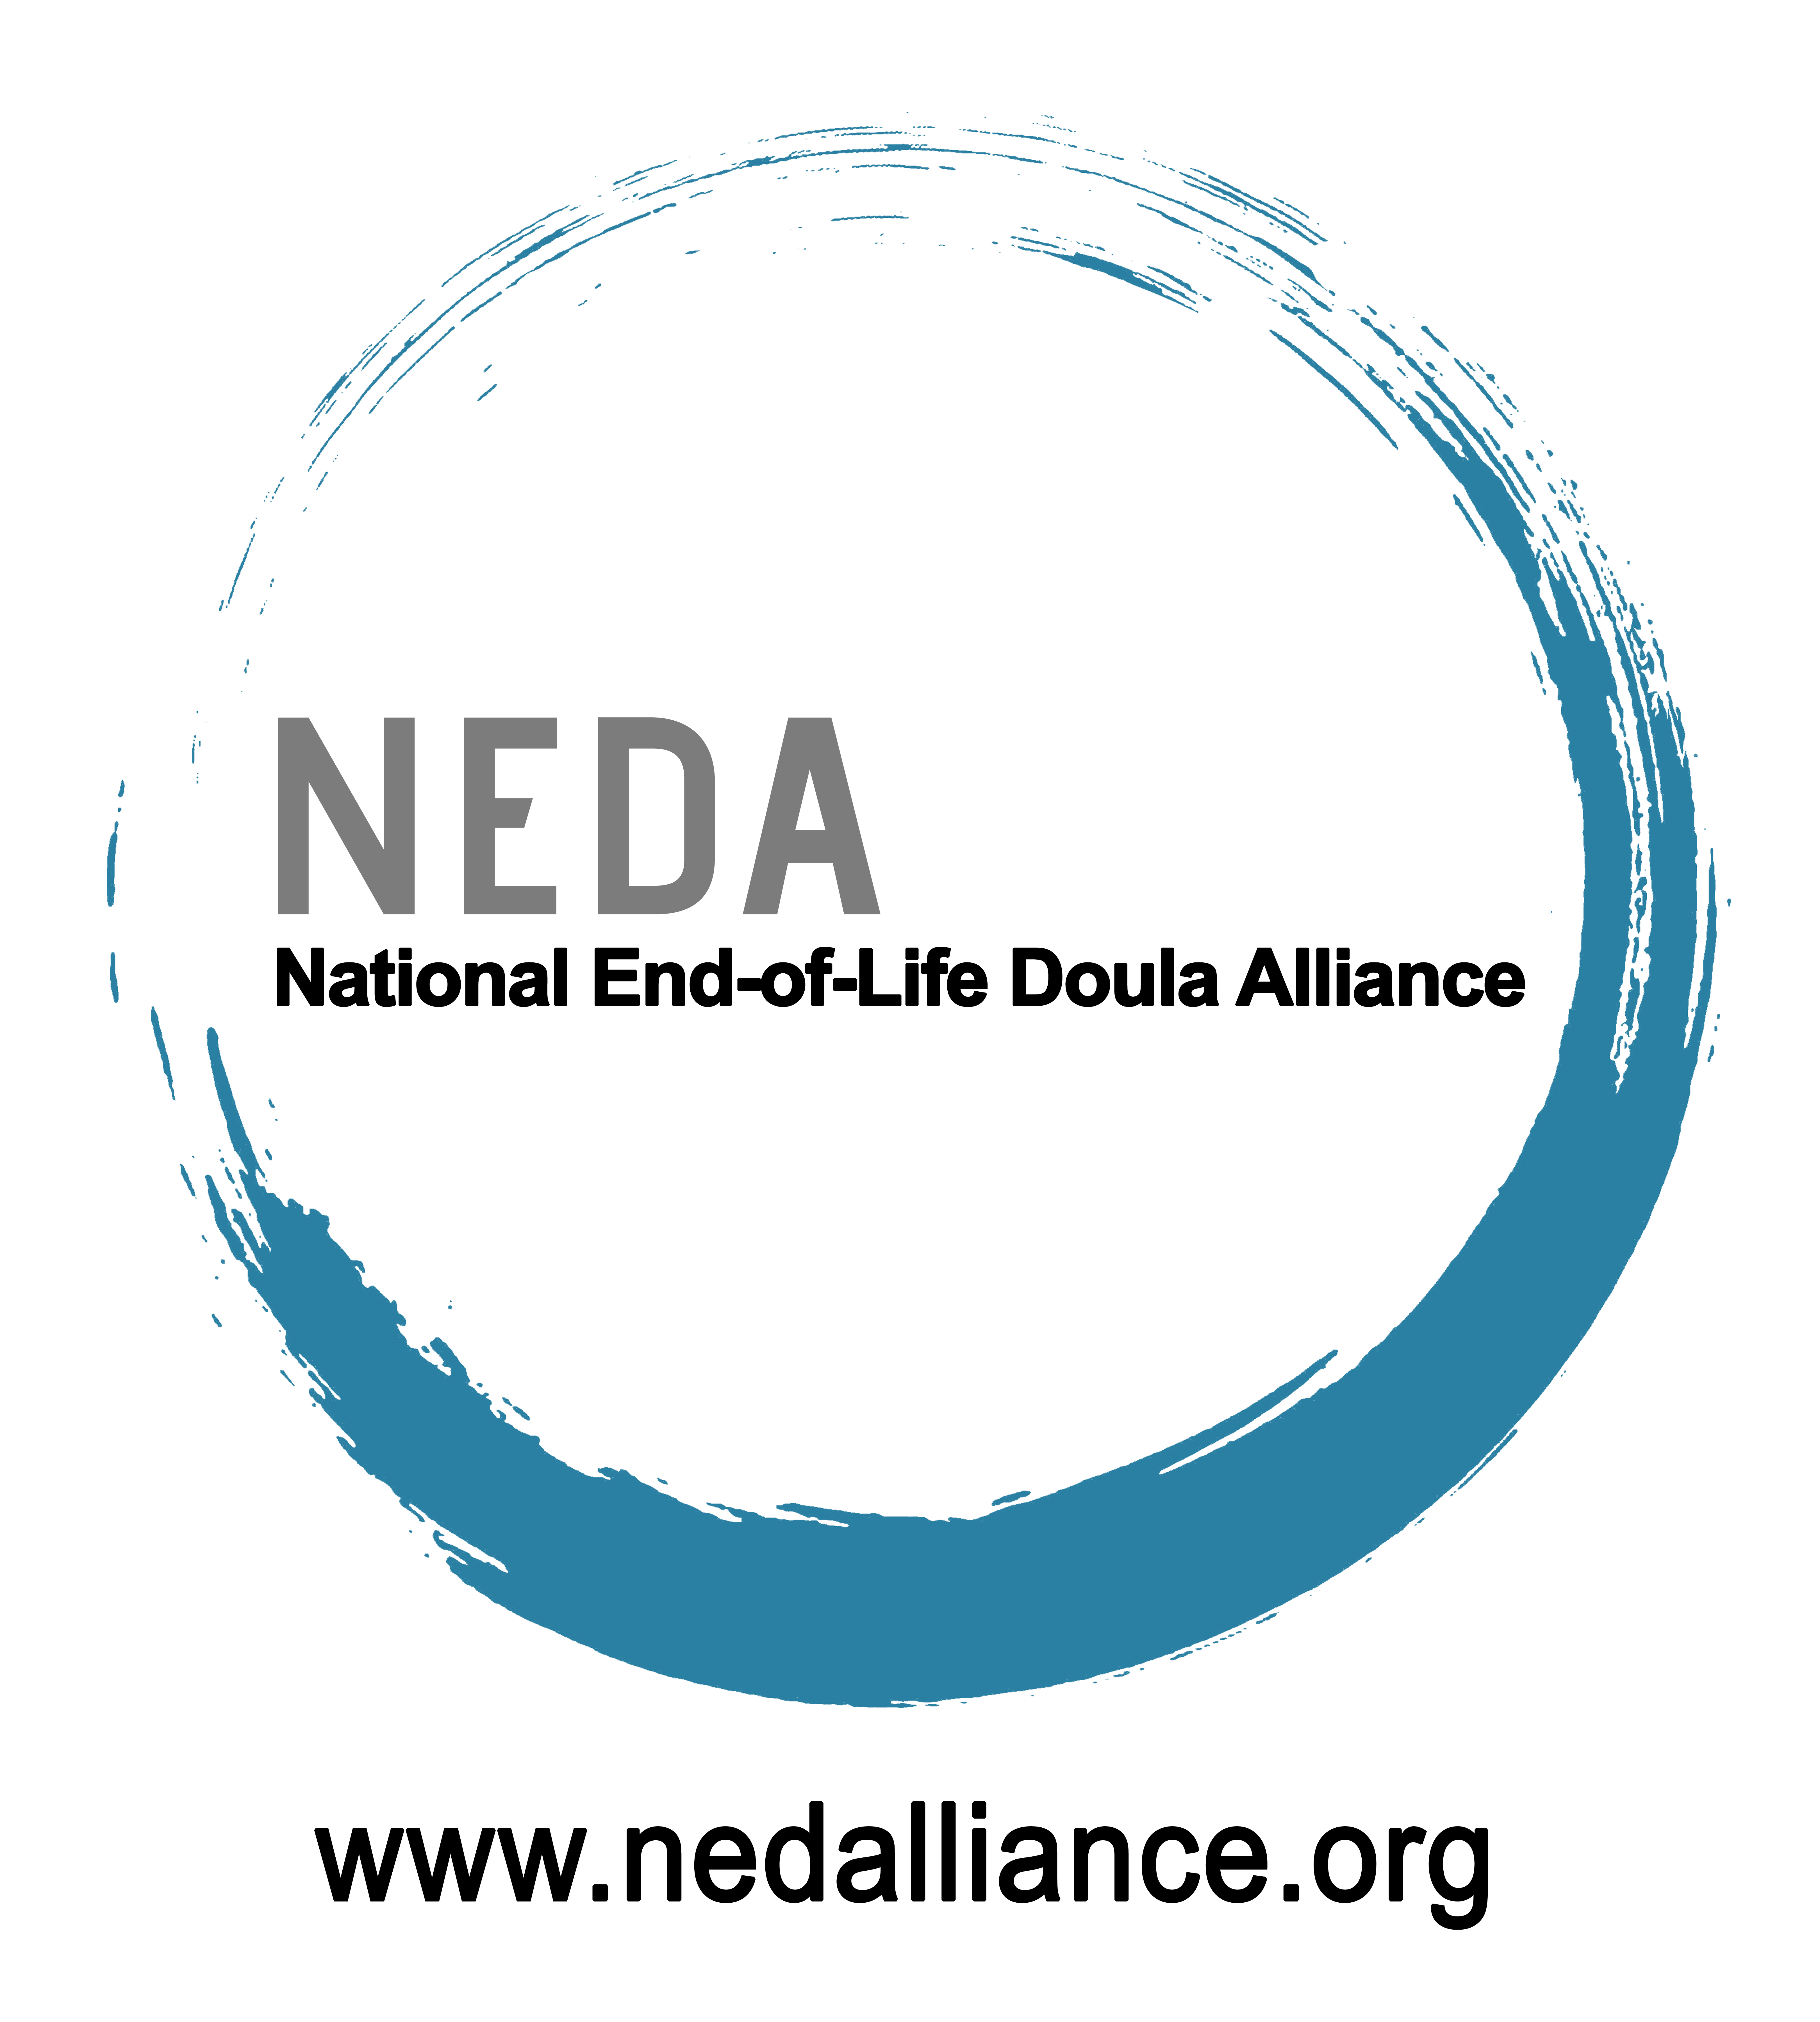 The National End-of-Life Doula Alliance